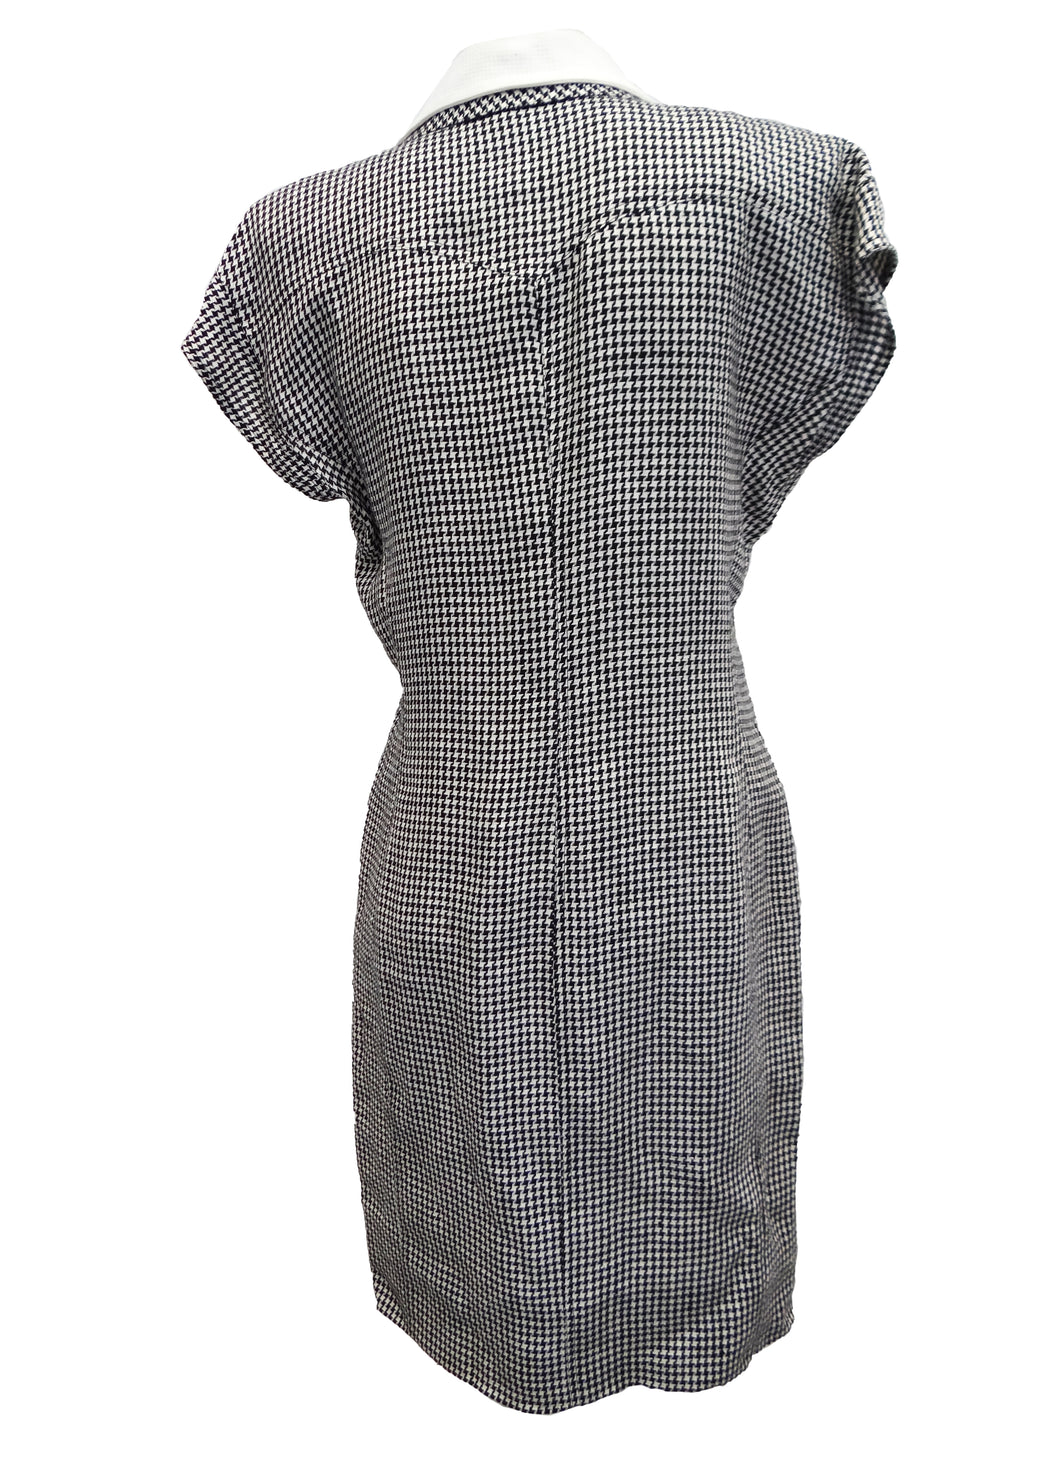 Ungaro Vintage Button-through Houndstooth Dress with Contrasting Colla ...